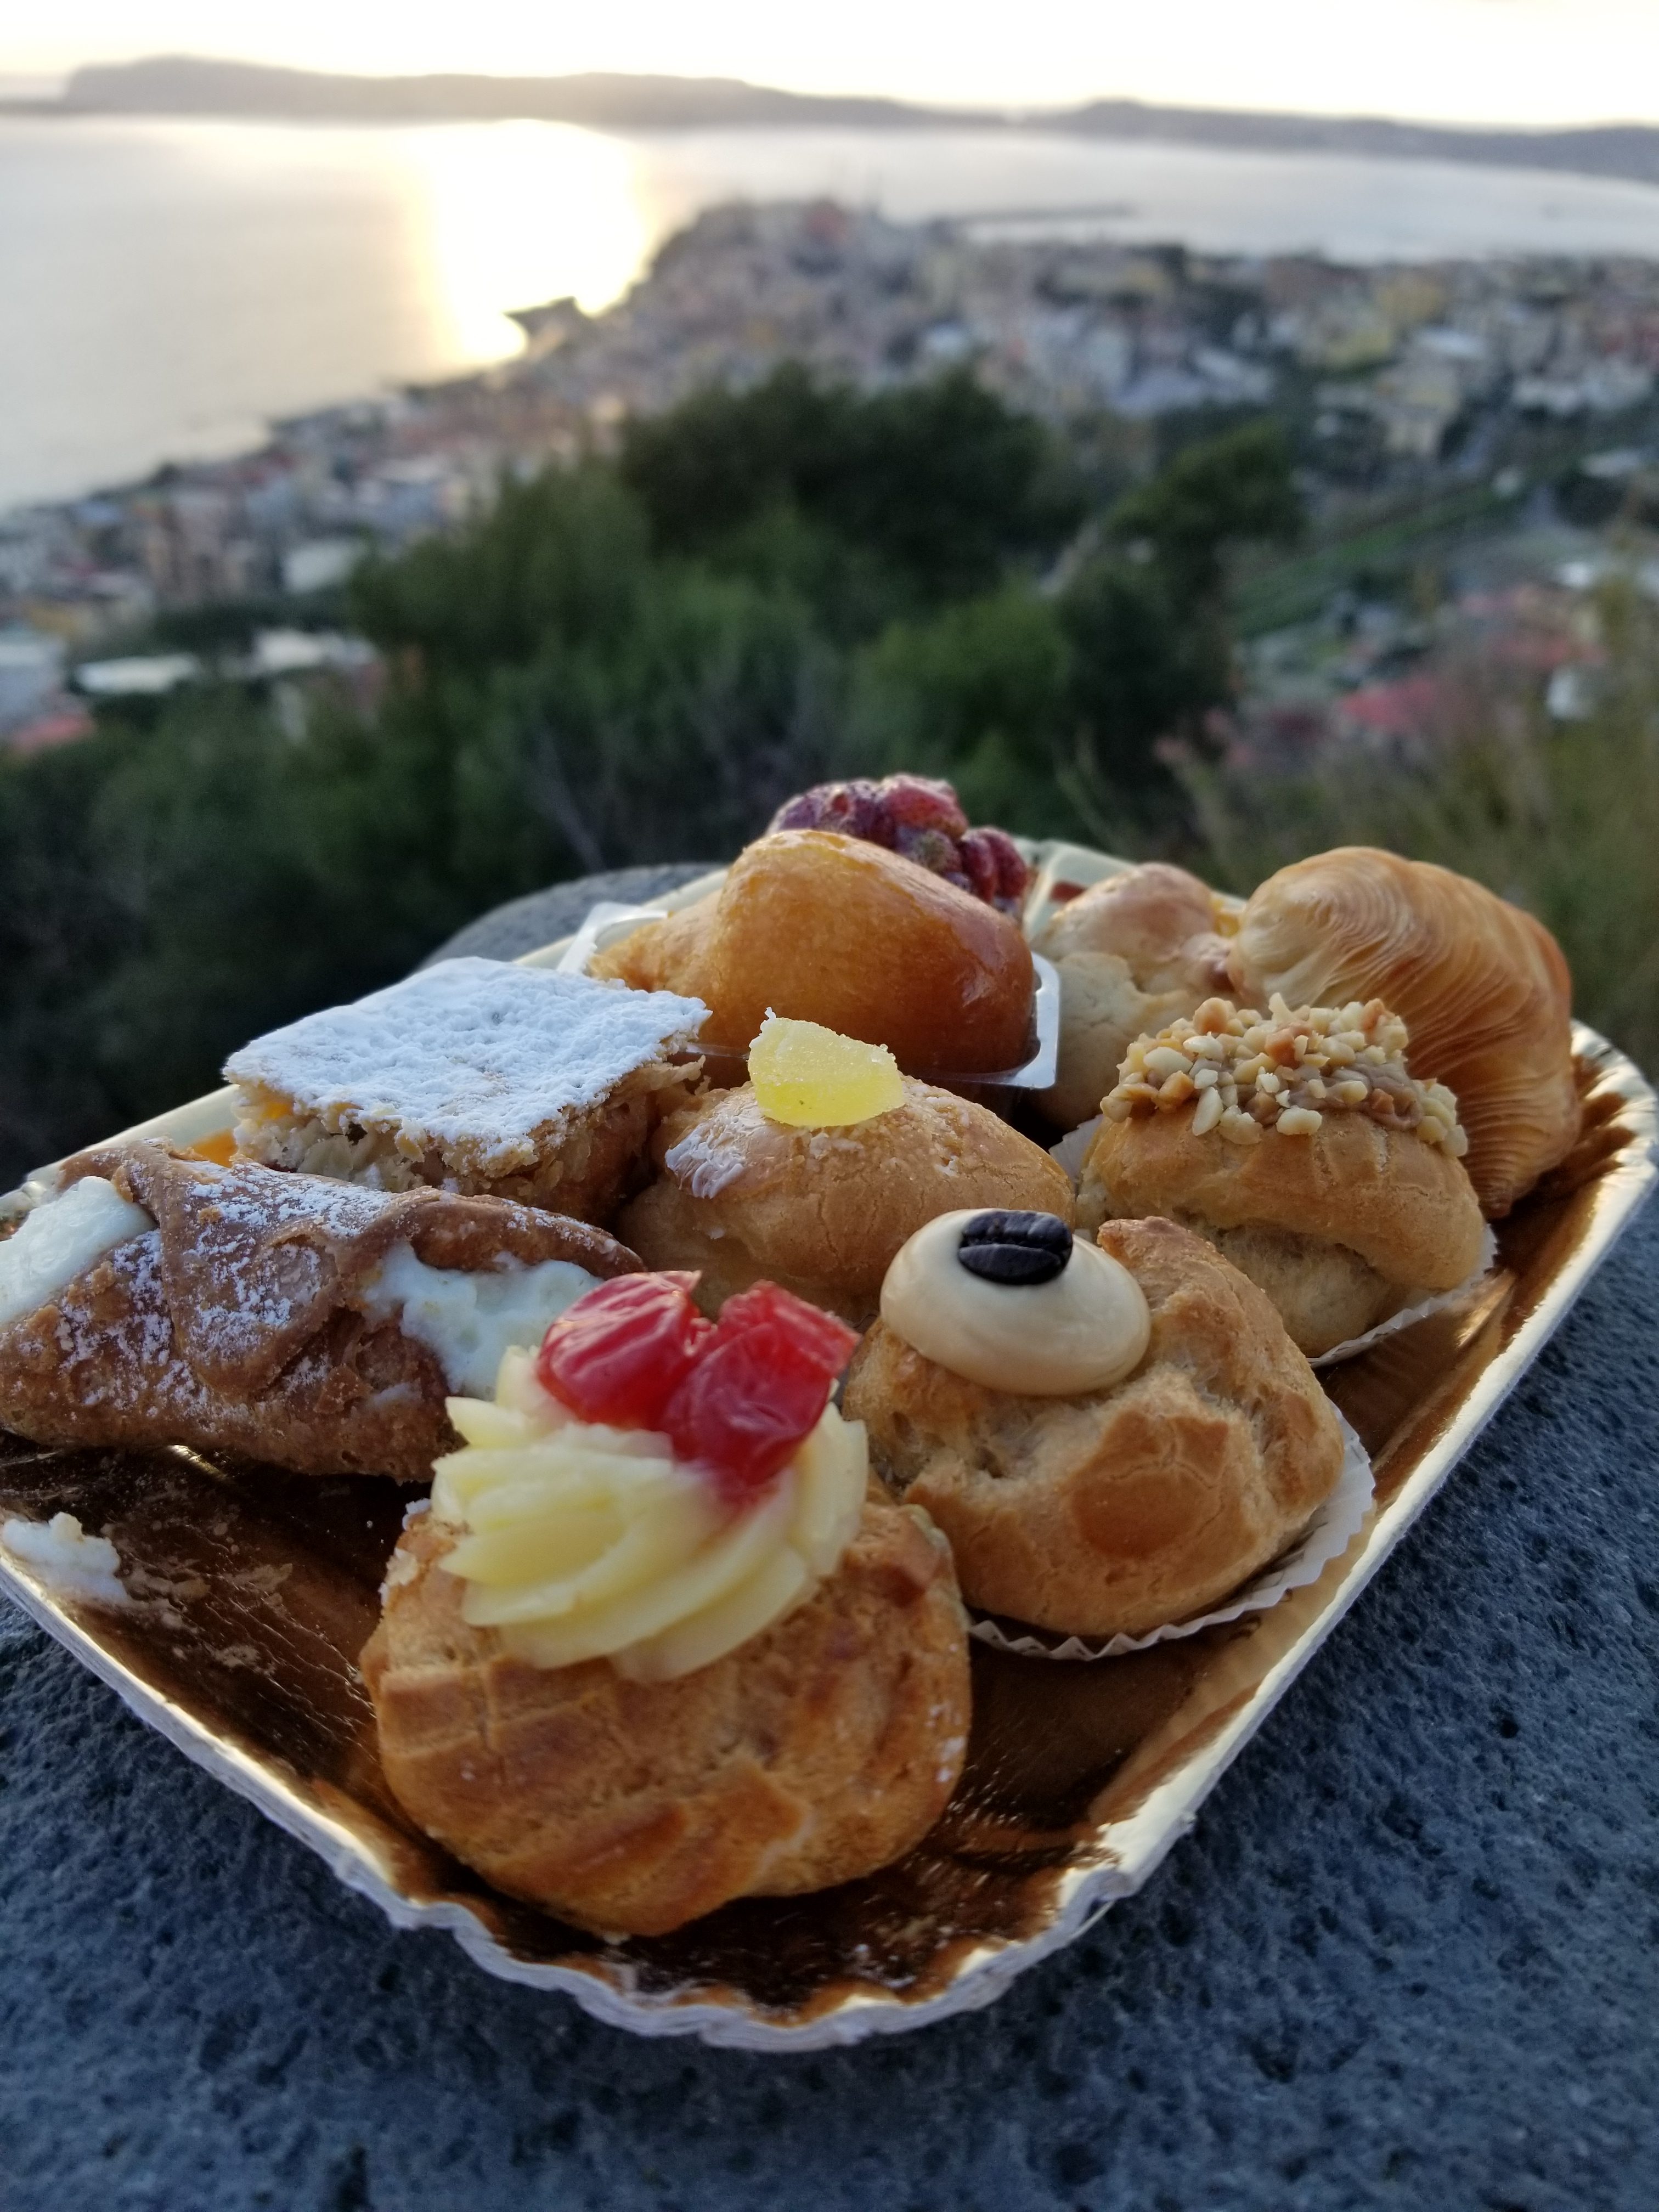 Tray of pastries with sea and city background italy